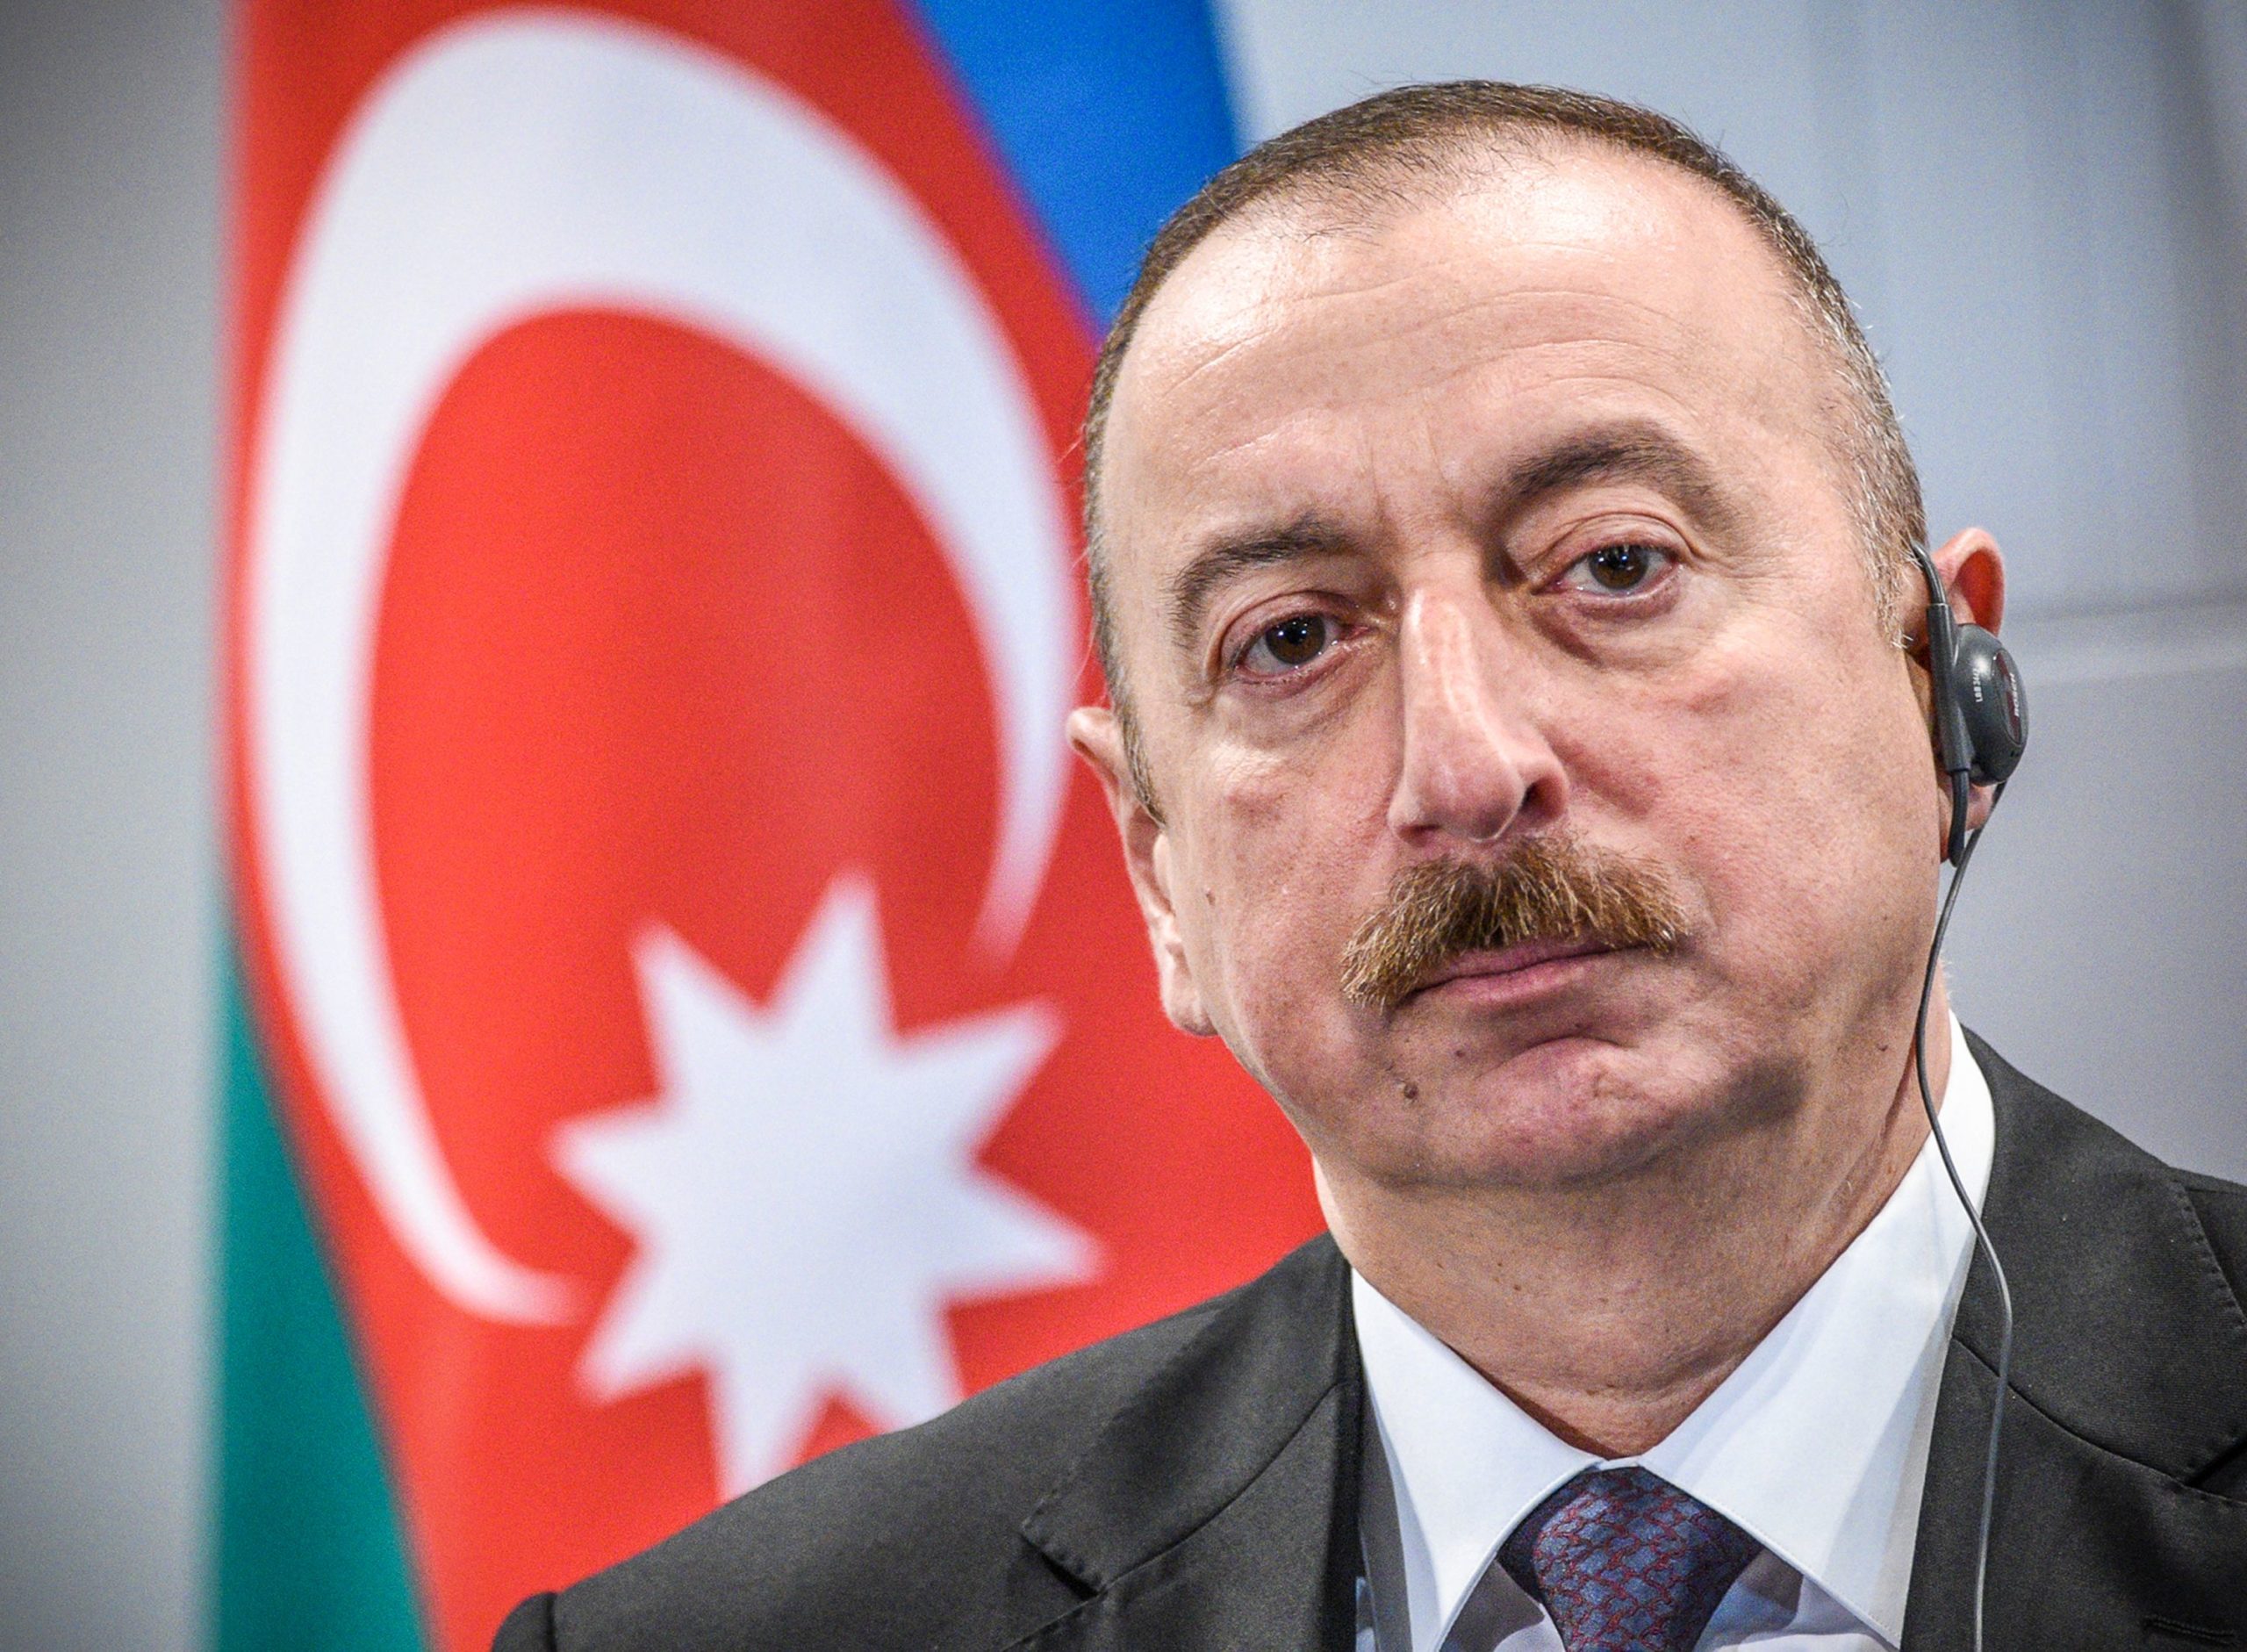 Life in Azerbaijan’s Digital Autocracy: ‘They Want to be in Control of Everything’ 1